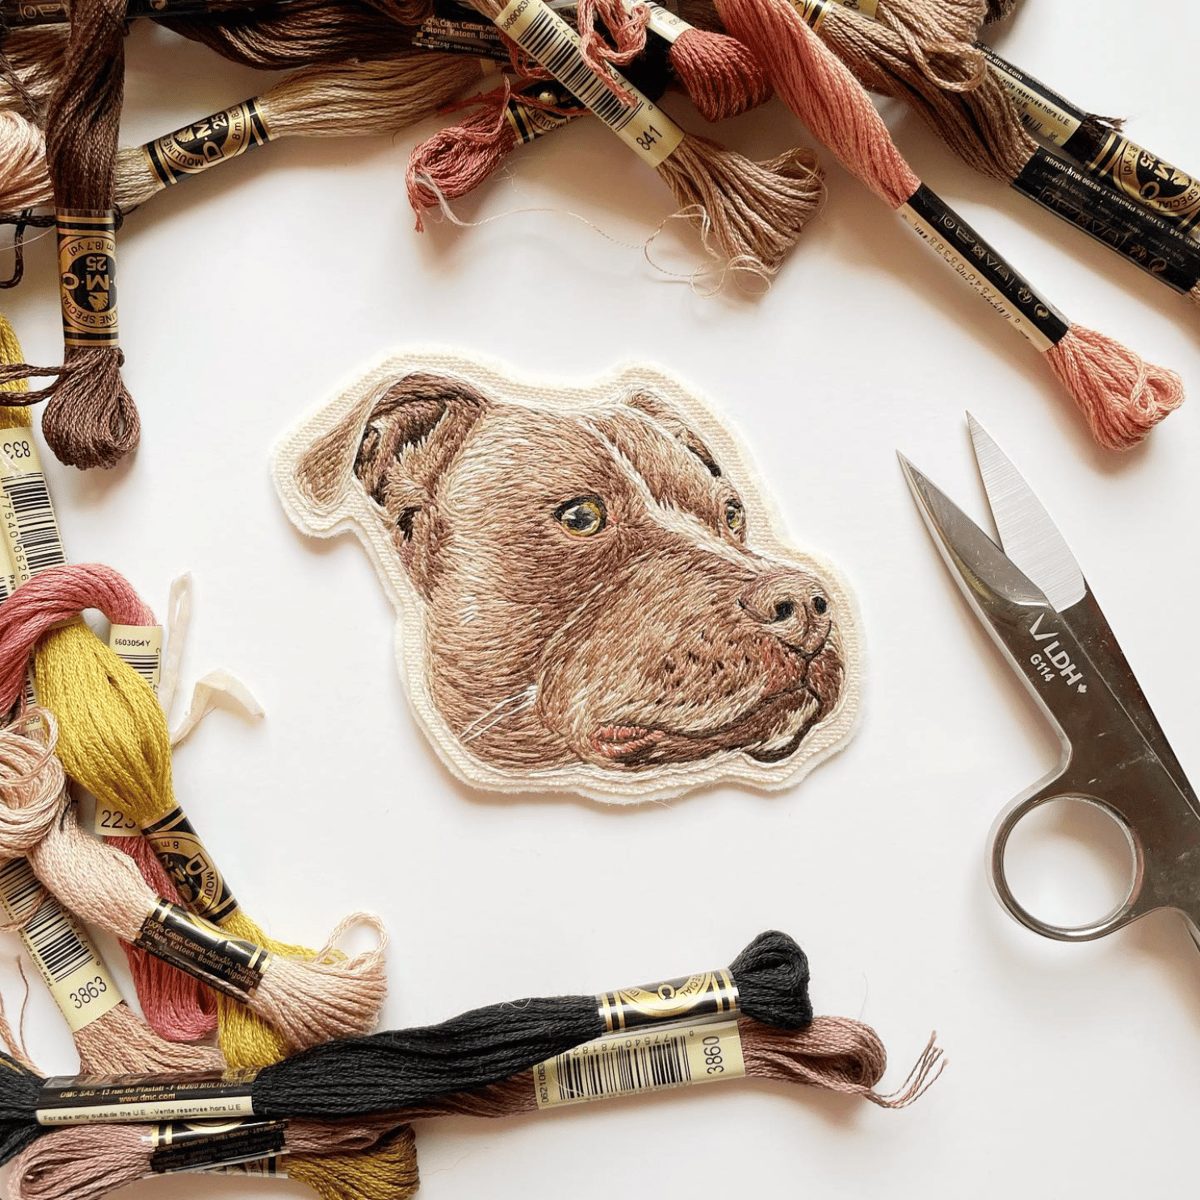 Custom Hand Embroidered Pet Portrait Patch